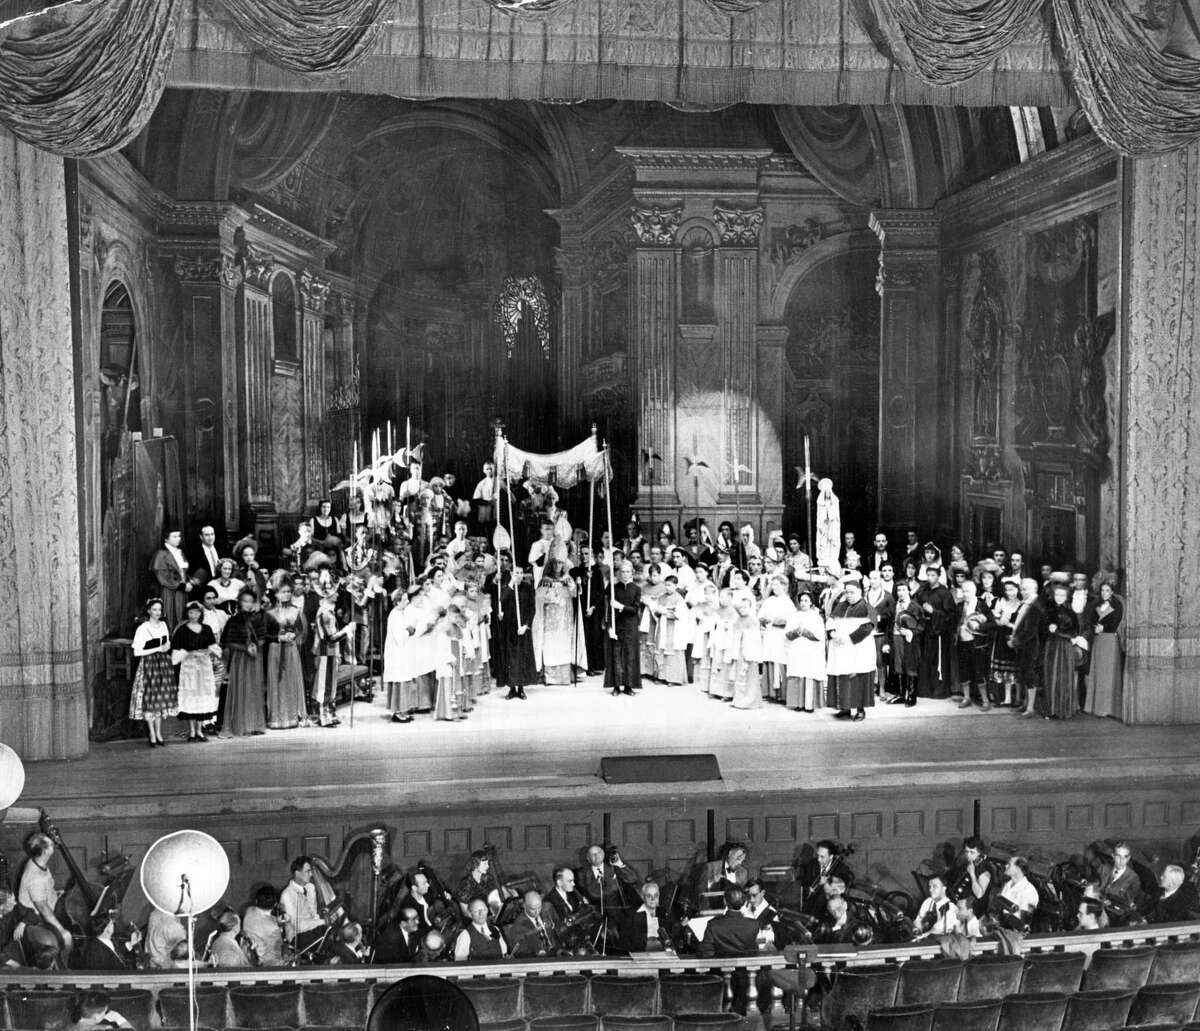 For 100 years, S.F. Opera has flourished with dedication of patrons and